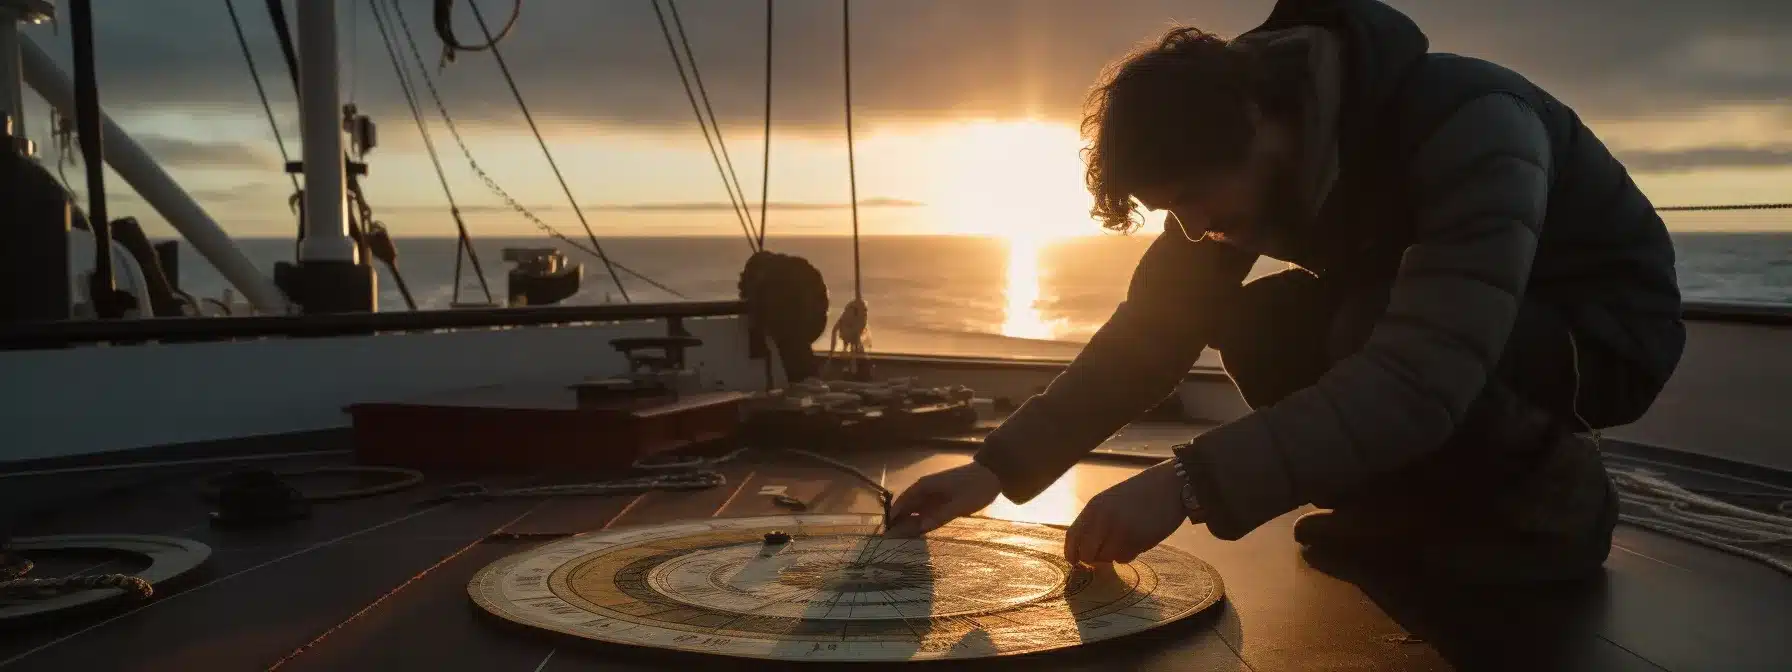 A Person Carefully Adjusting A Compass Needle On A Ship'S Deck, Surrounded By A Stormy Sea.